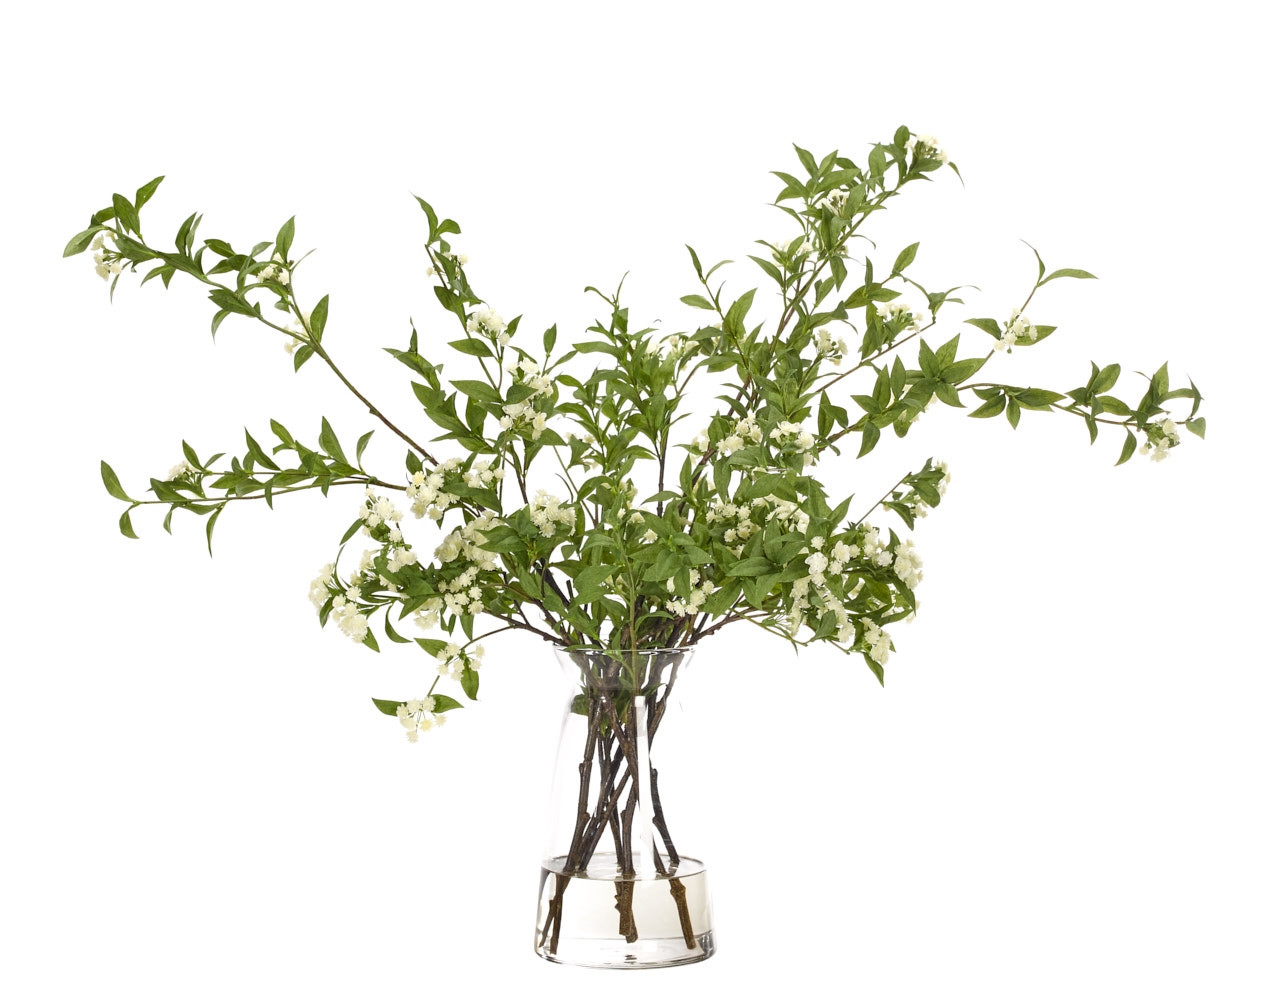 28 Lovable Artificial Branches for Vases 2024 free download artificial branches for vases of spiraea branch white cinched glass vase 30wx20dx24h in 2cc831191a07aab801eac0ba8b63